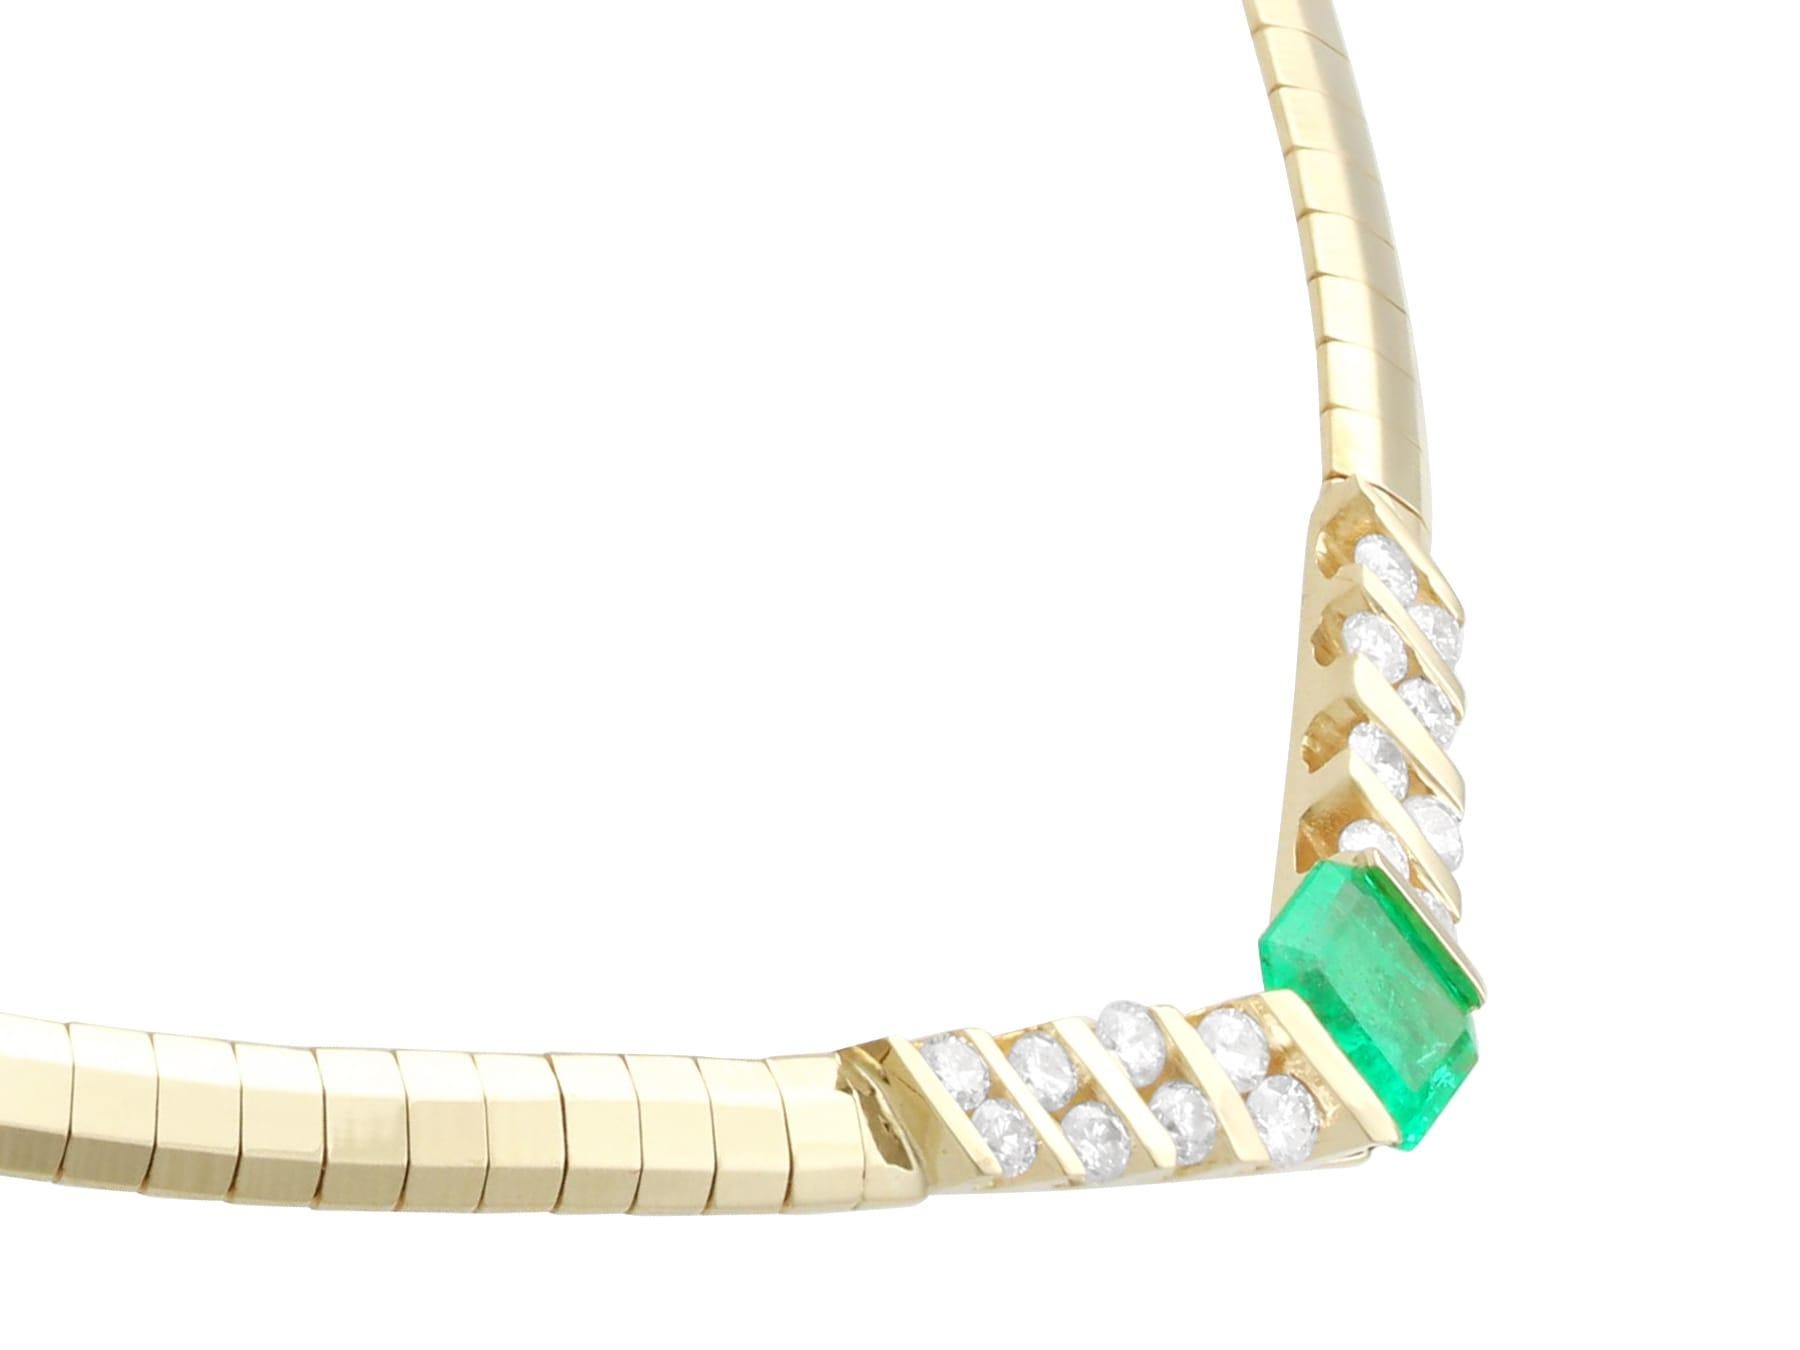 A stunning, fine and impressive vintage 0.95 carat emerald and 0.45 carat diamond, 14 karat yellow gold necklace; part of our diverse necklace collection

This stunning, fine and impressive vintage necklace has been crafted in 14 karat yellow